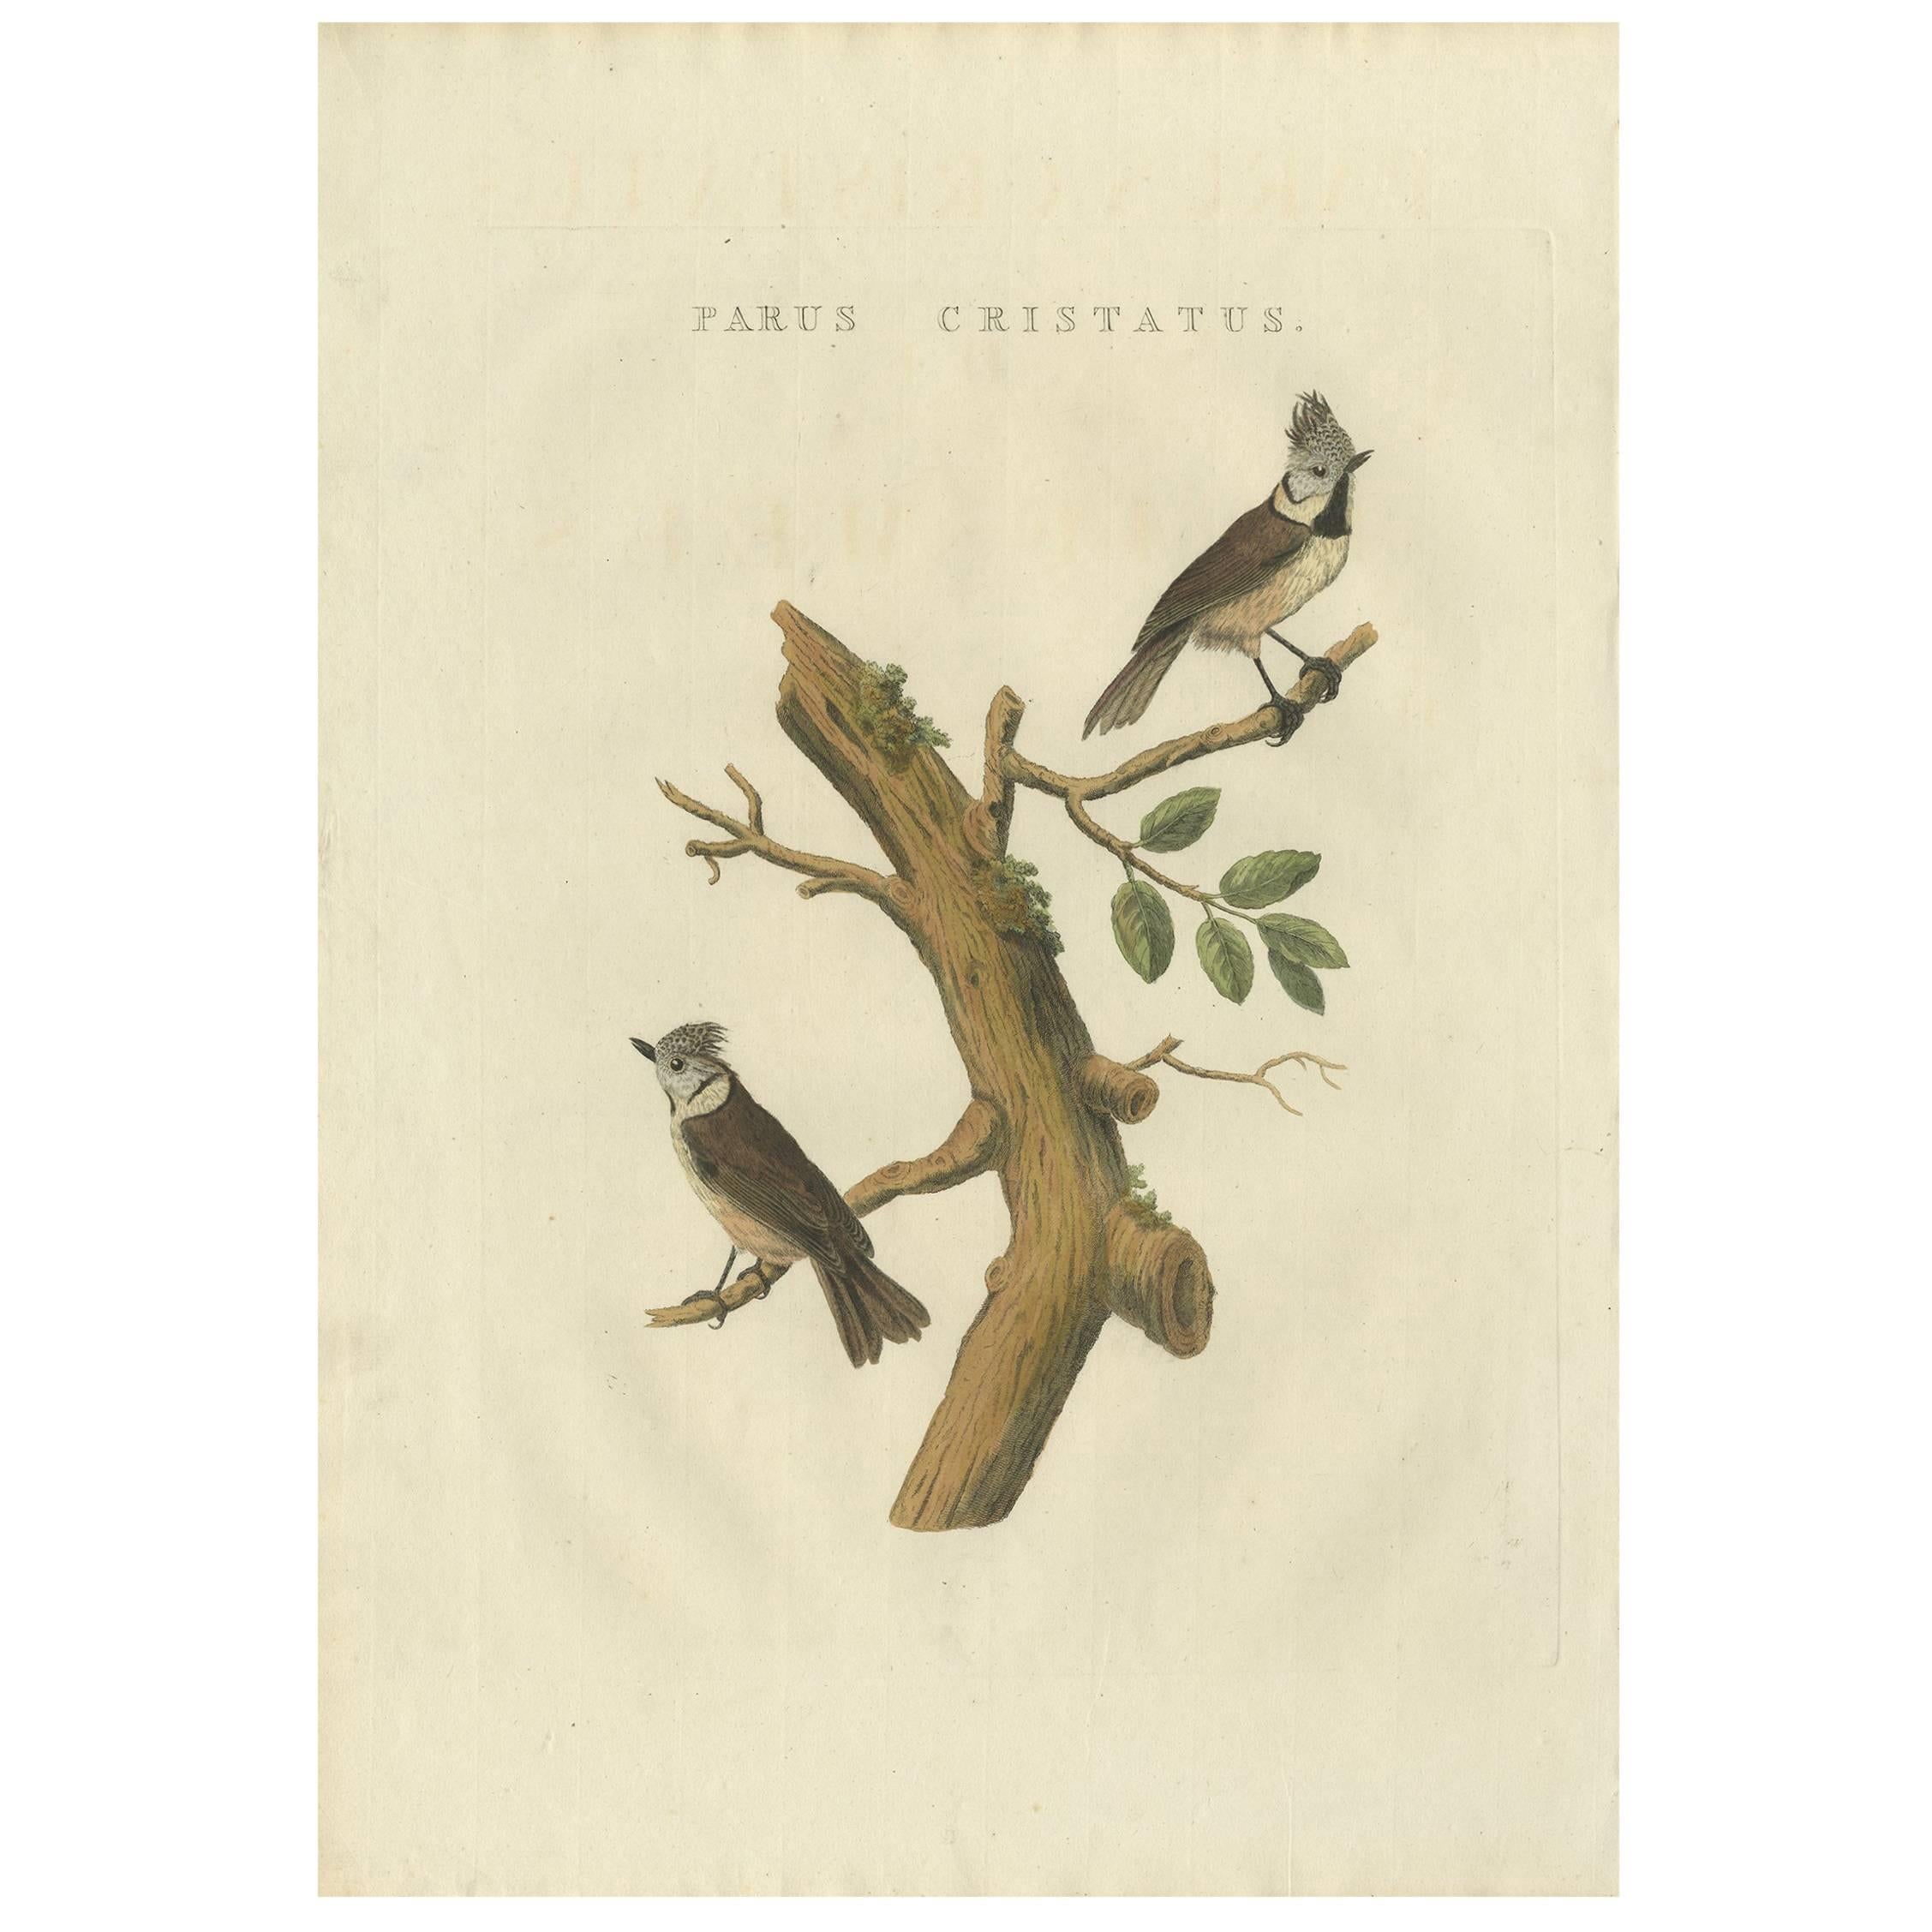 Antique Bird Print of the European Crested Tit by Sepp & Nozeman, 1829 For Sale